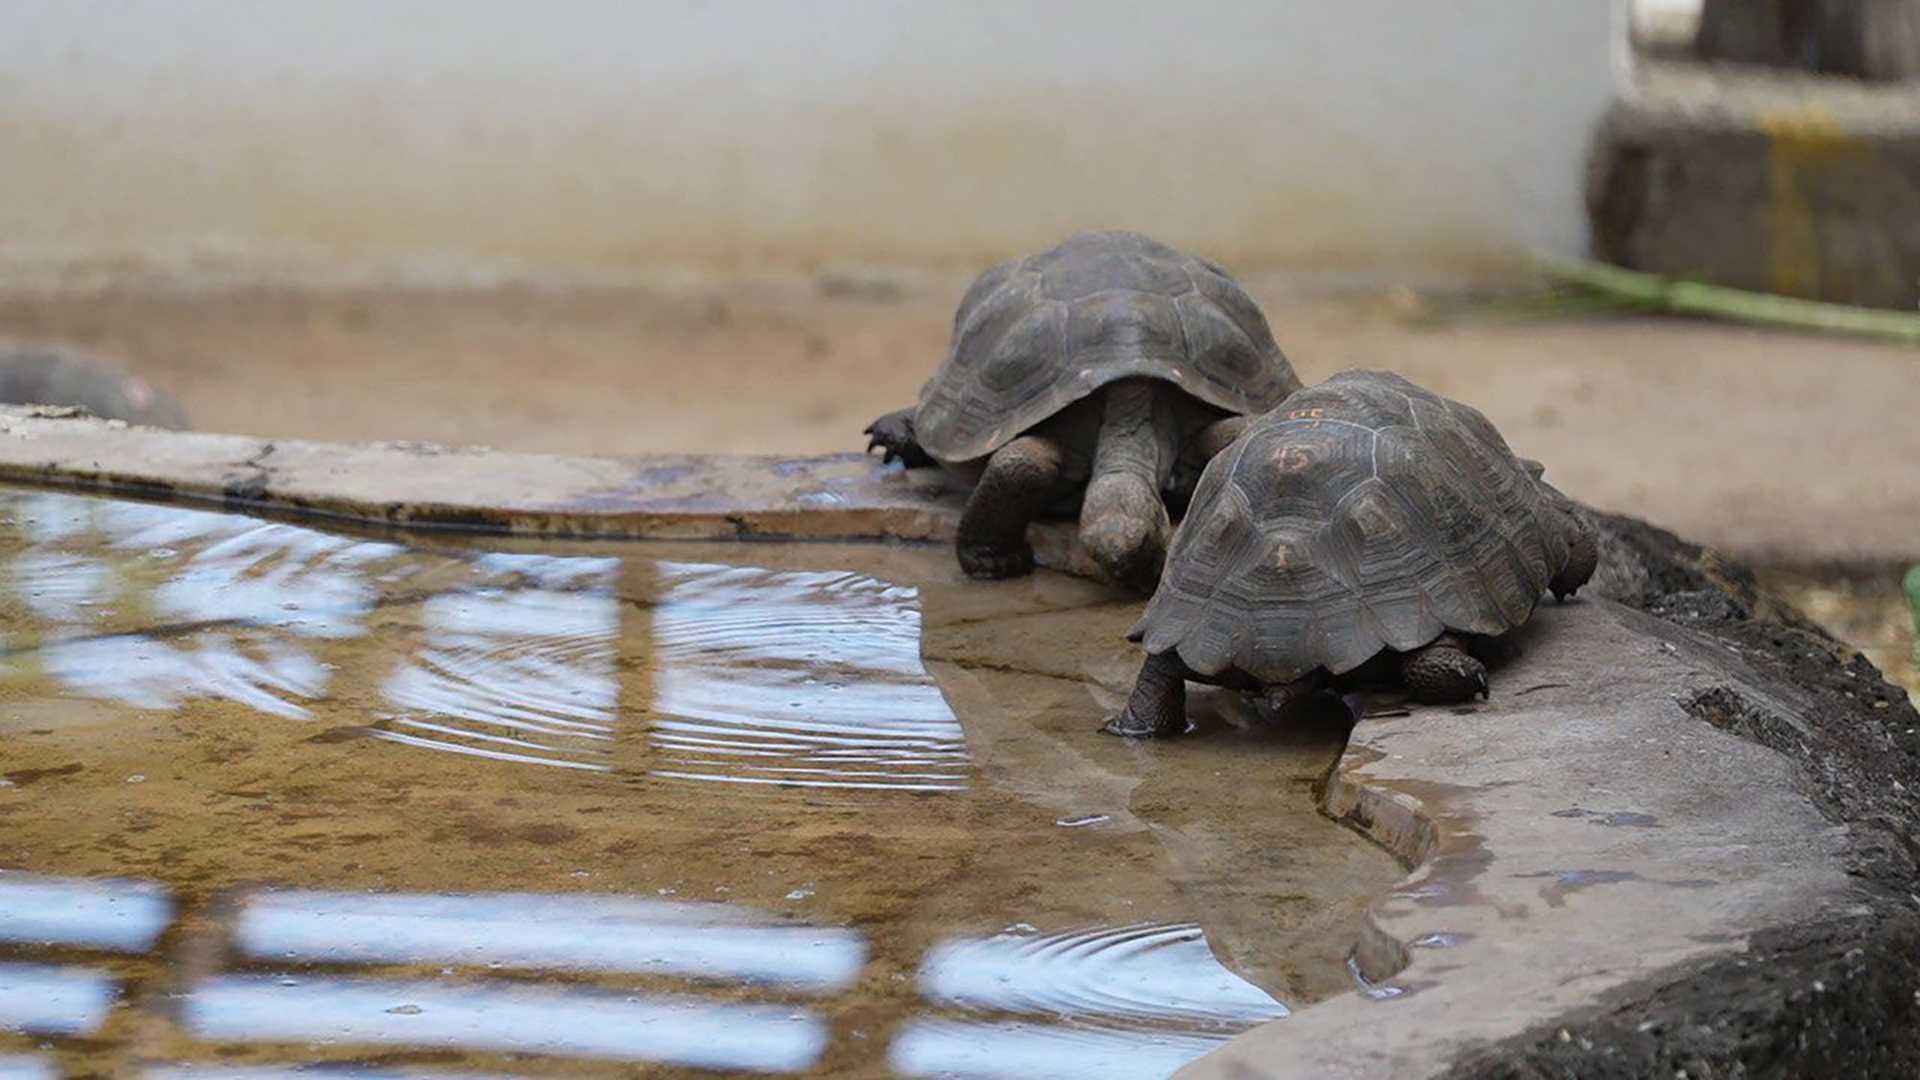 two baby tortoises drinking water